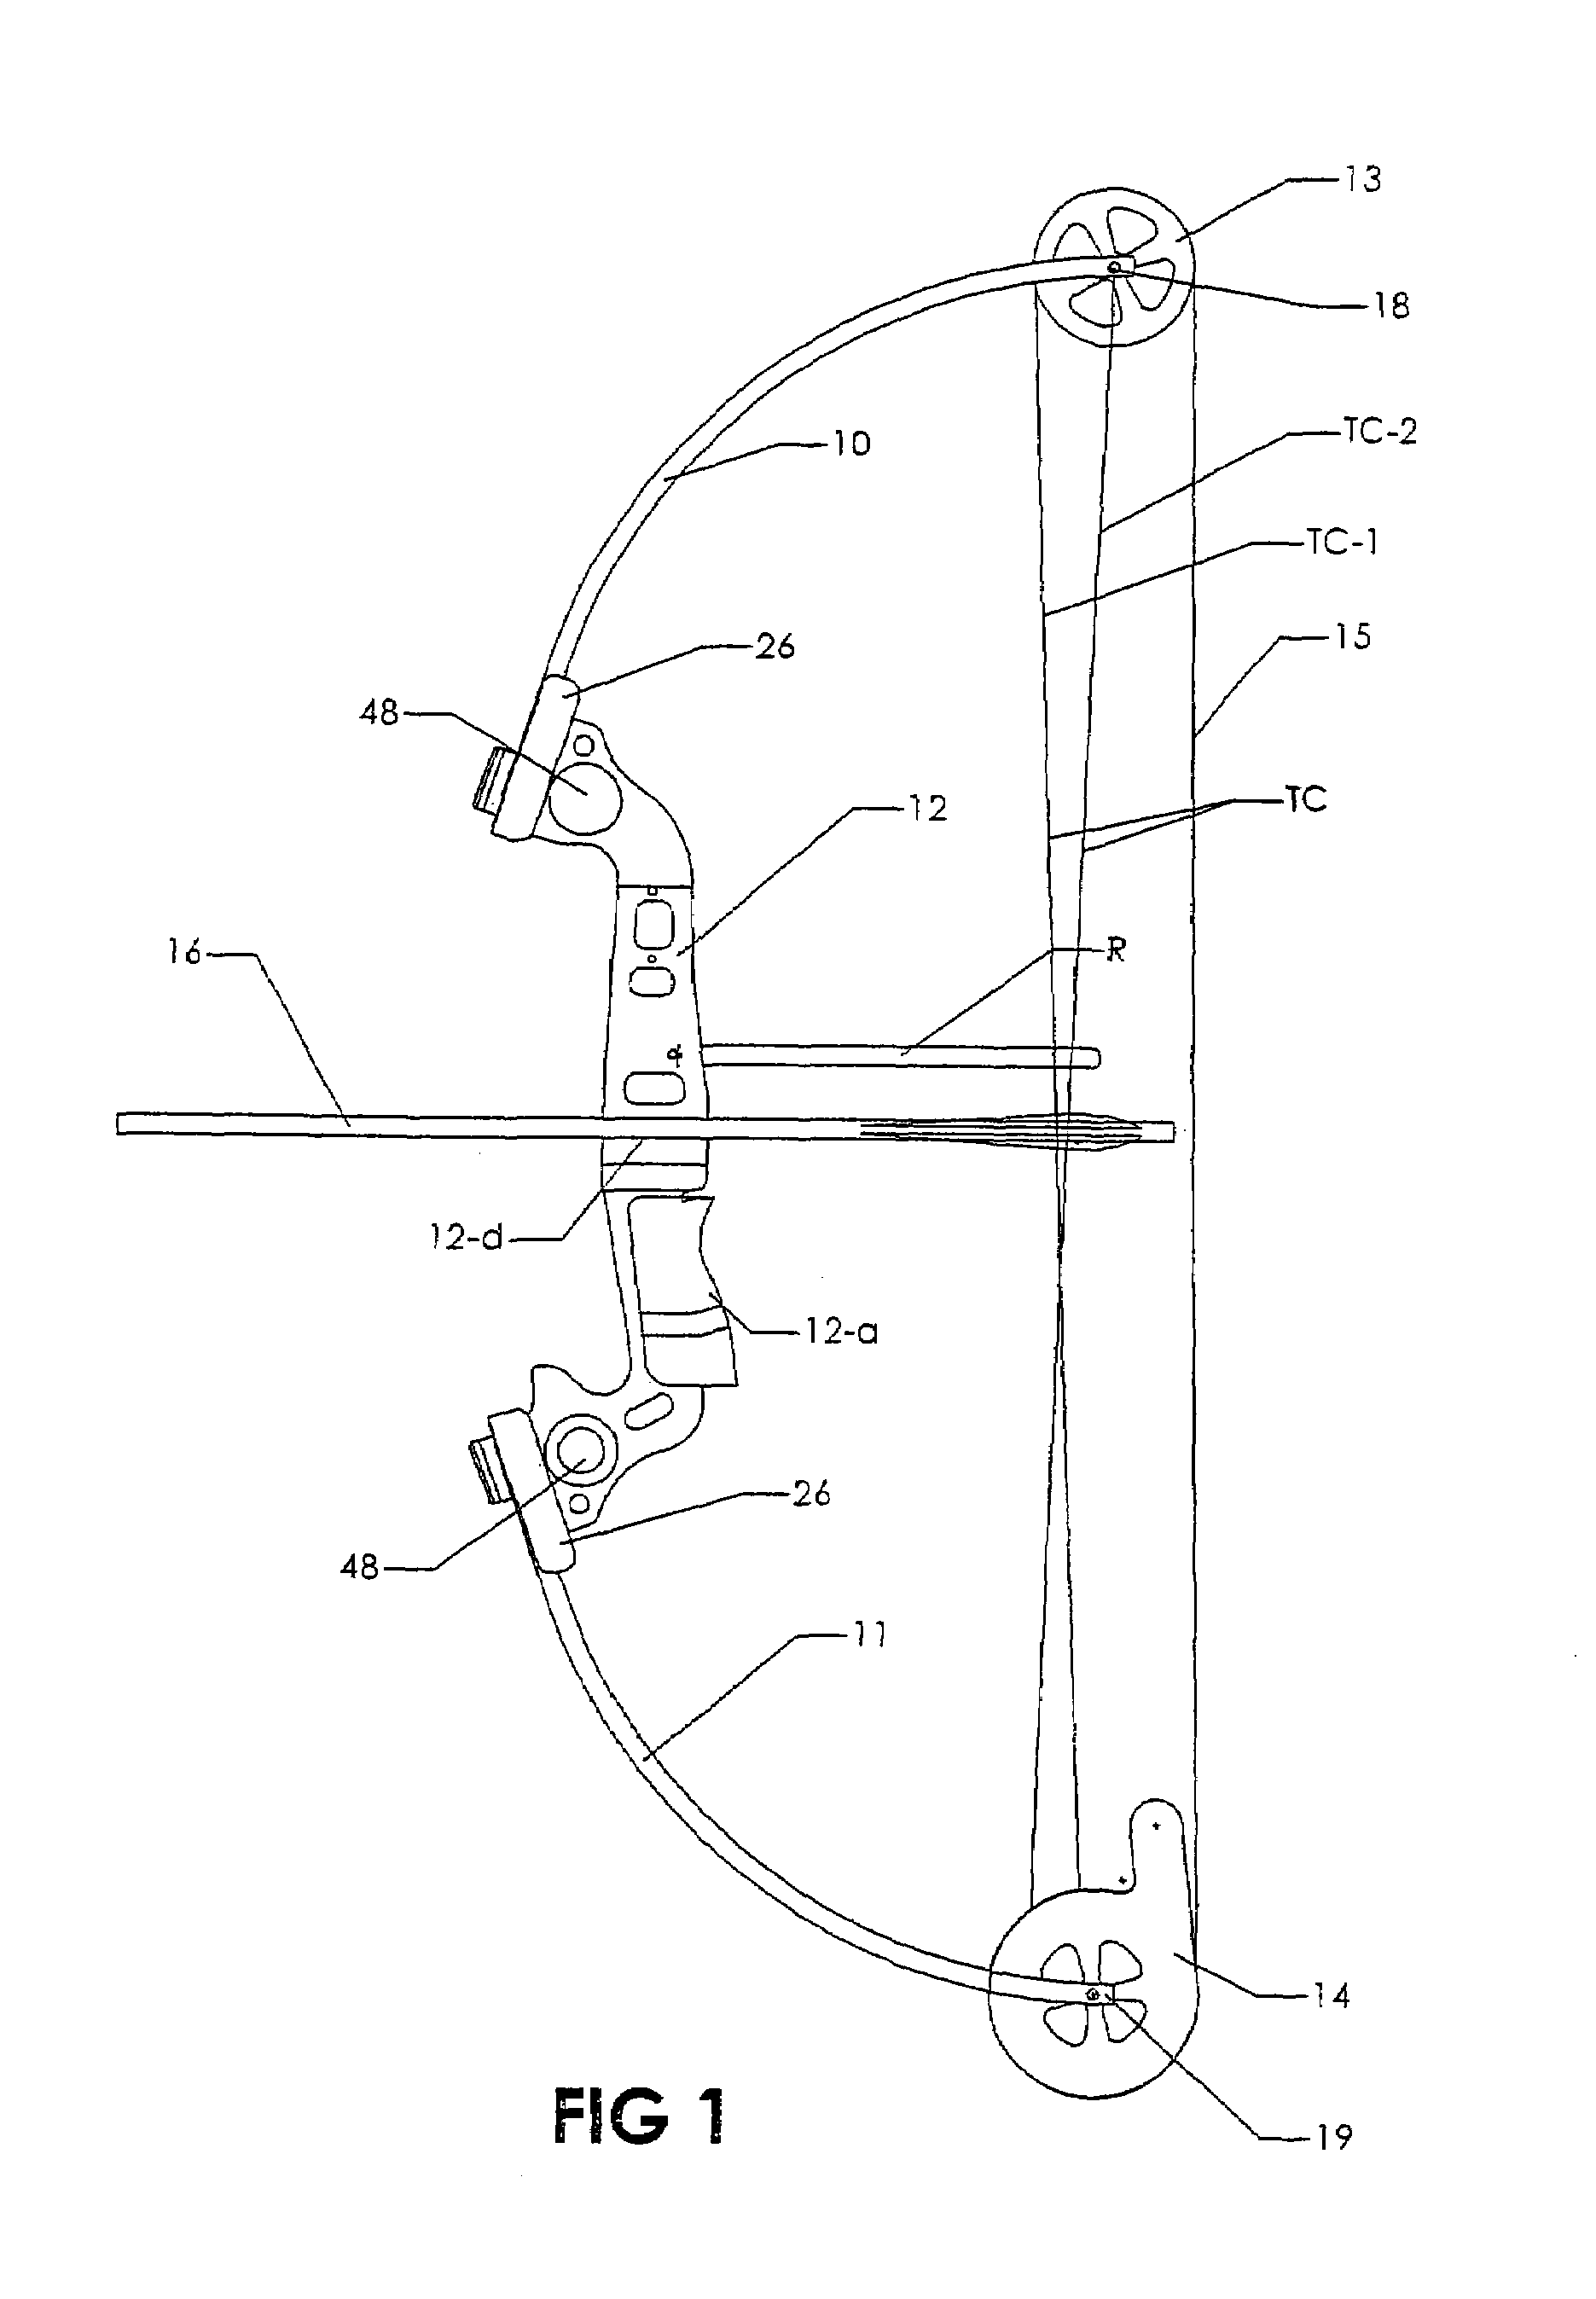 Compound archery bow construction and methods of making and operating the bow